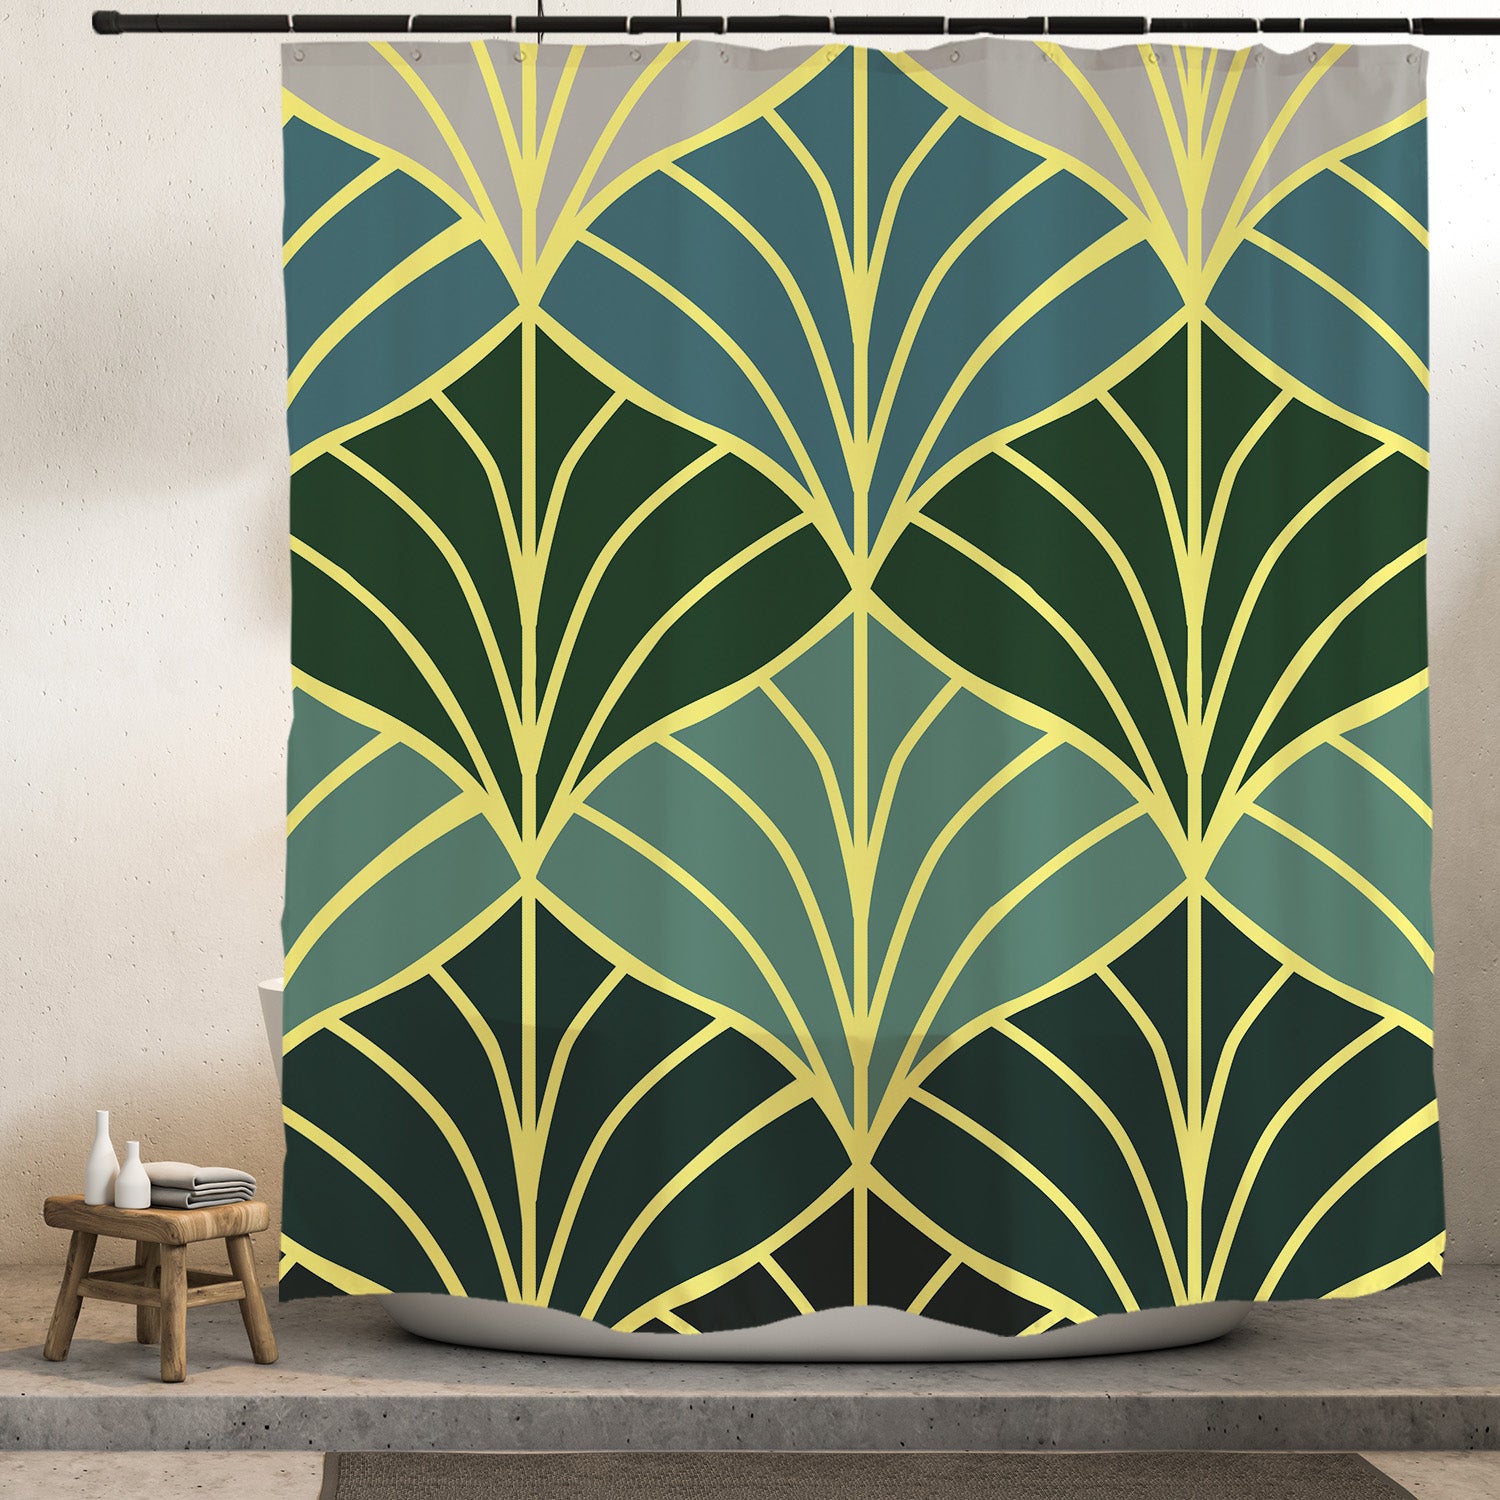 Feblilac Golden Green Ginkgo Leaves Shower Curtain with Hooks